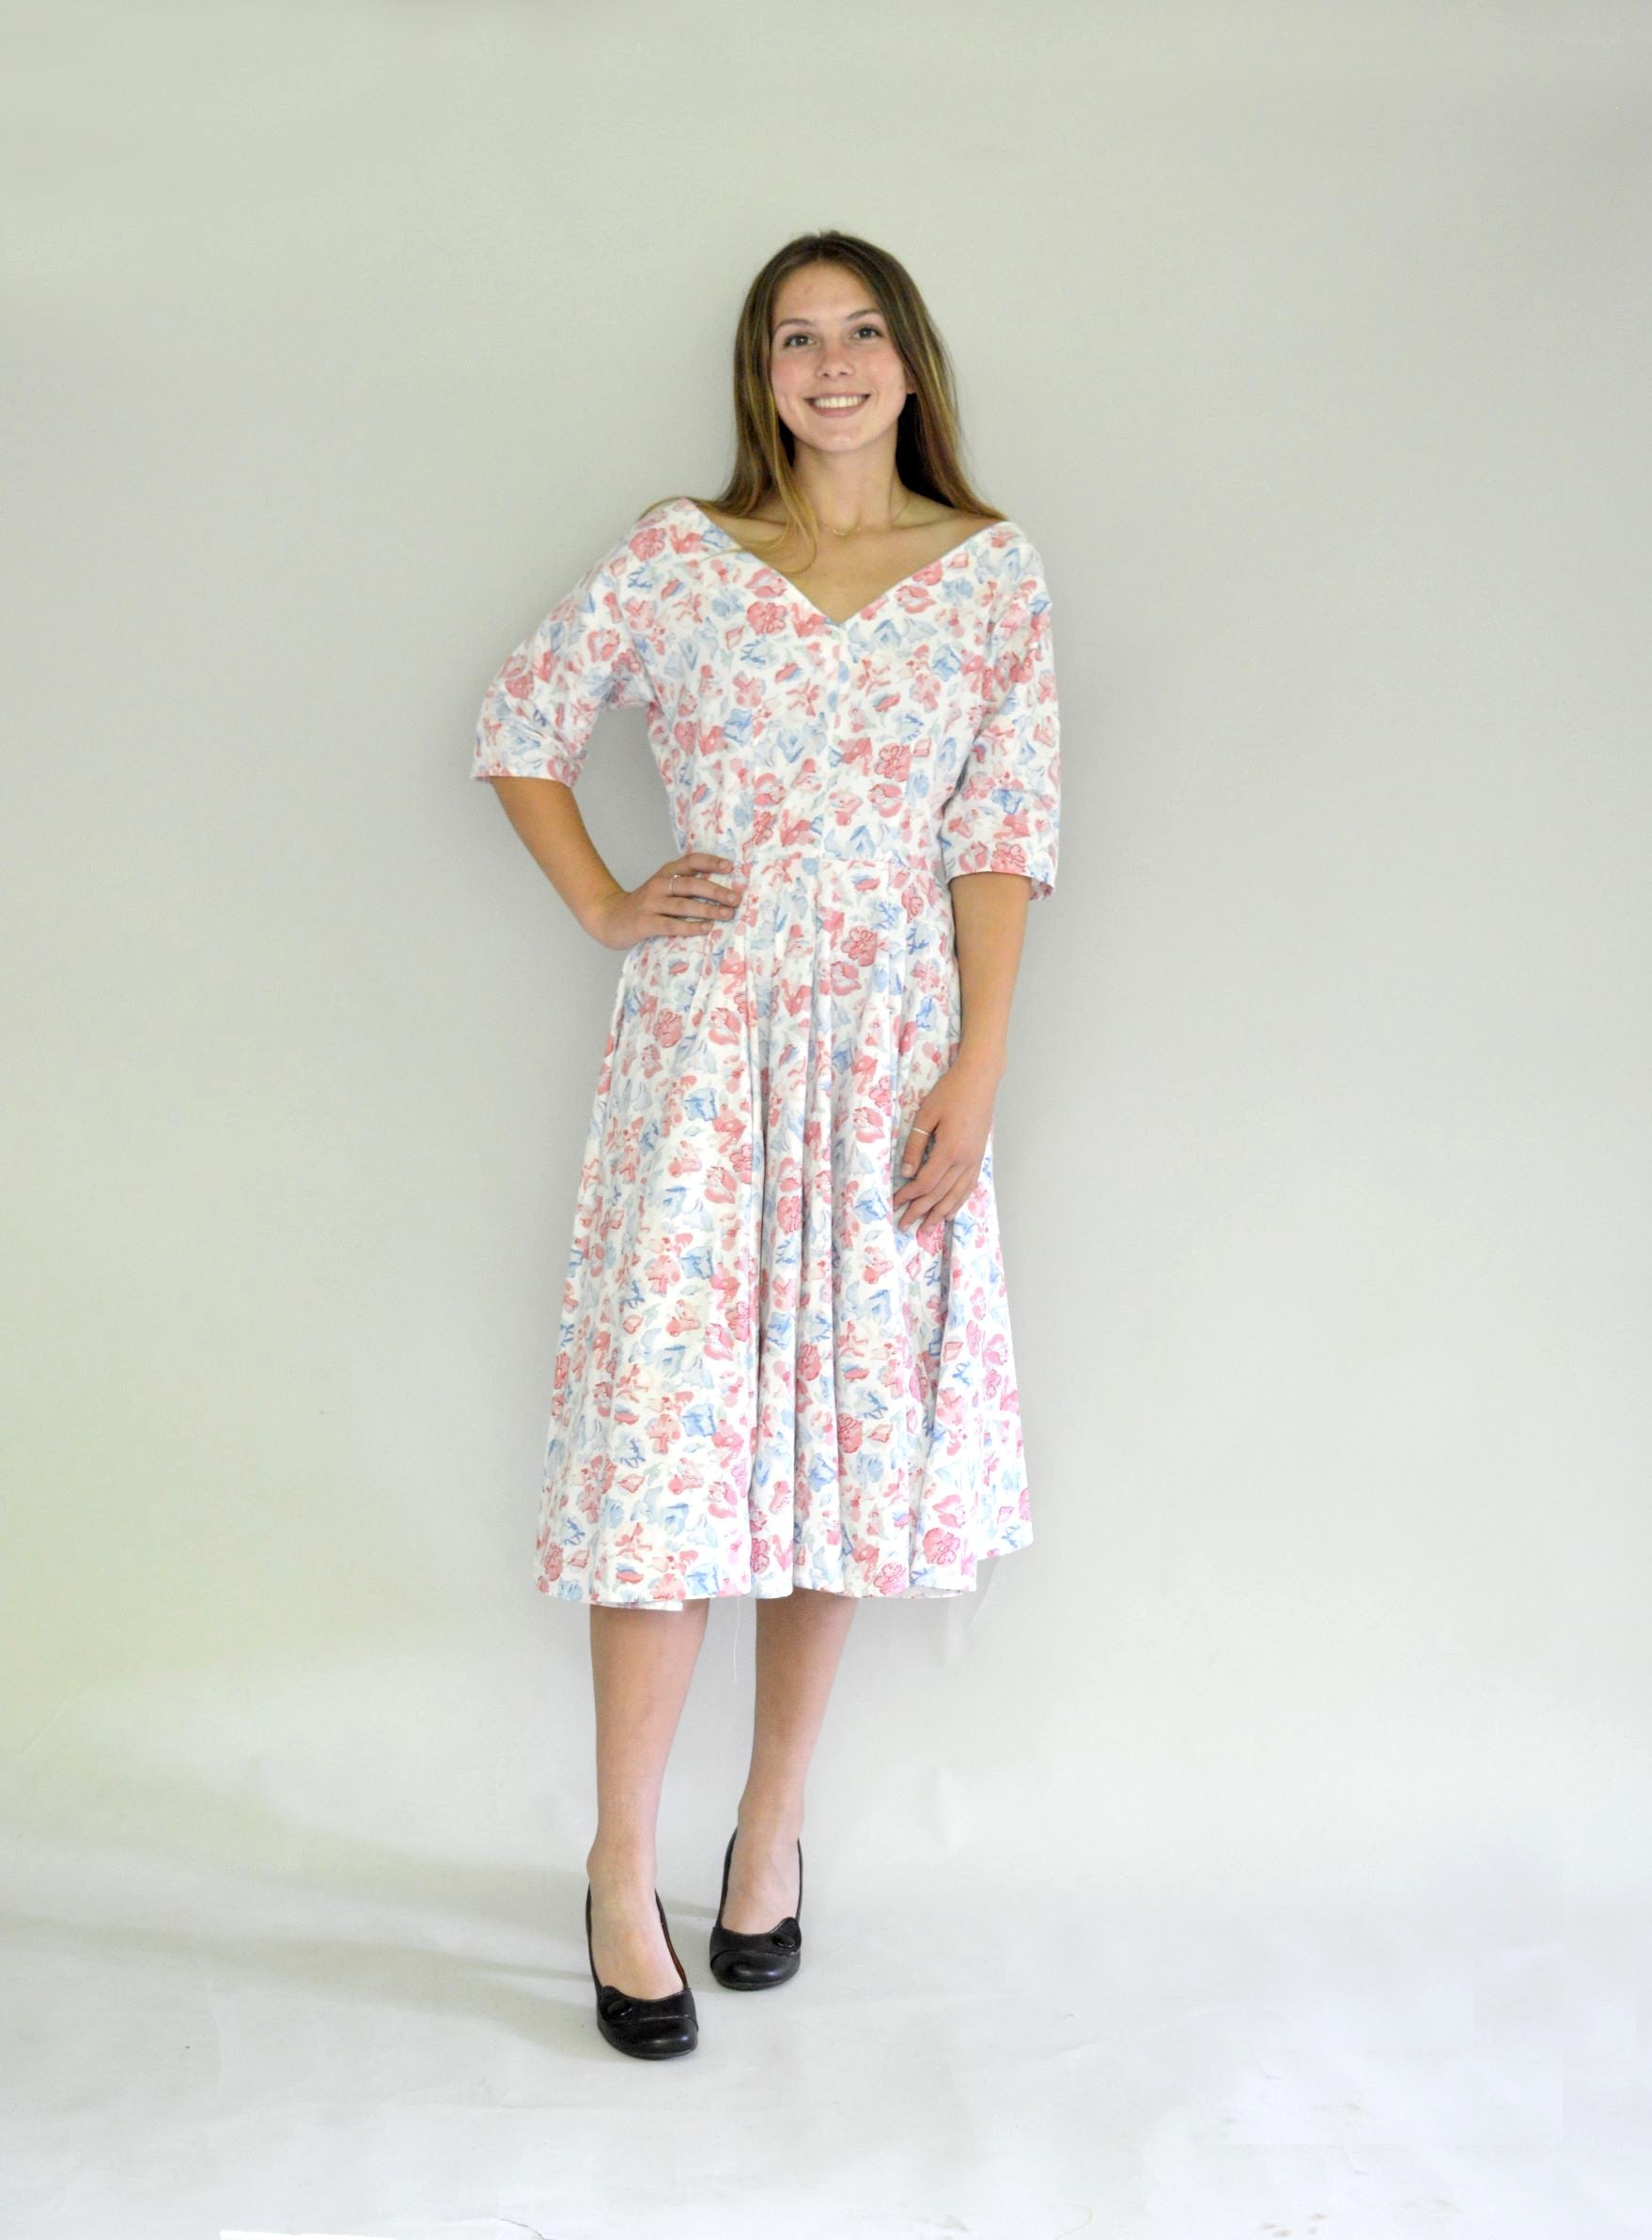 Young woman smiling wearing a below-knee length white and pink floral print dress with a v-neck and 3/4 length sleeves and black shoes.  She is in front of a white background.